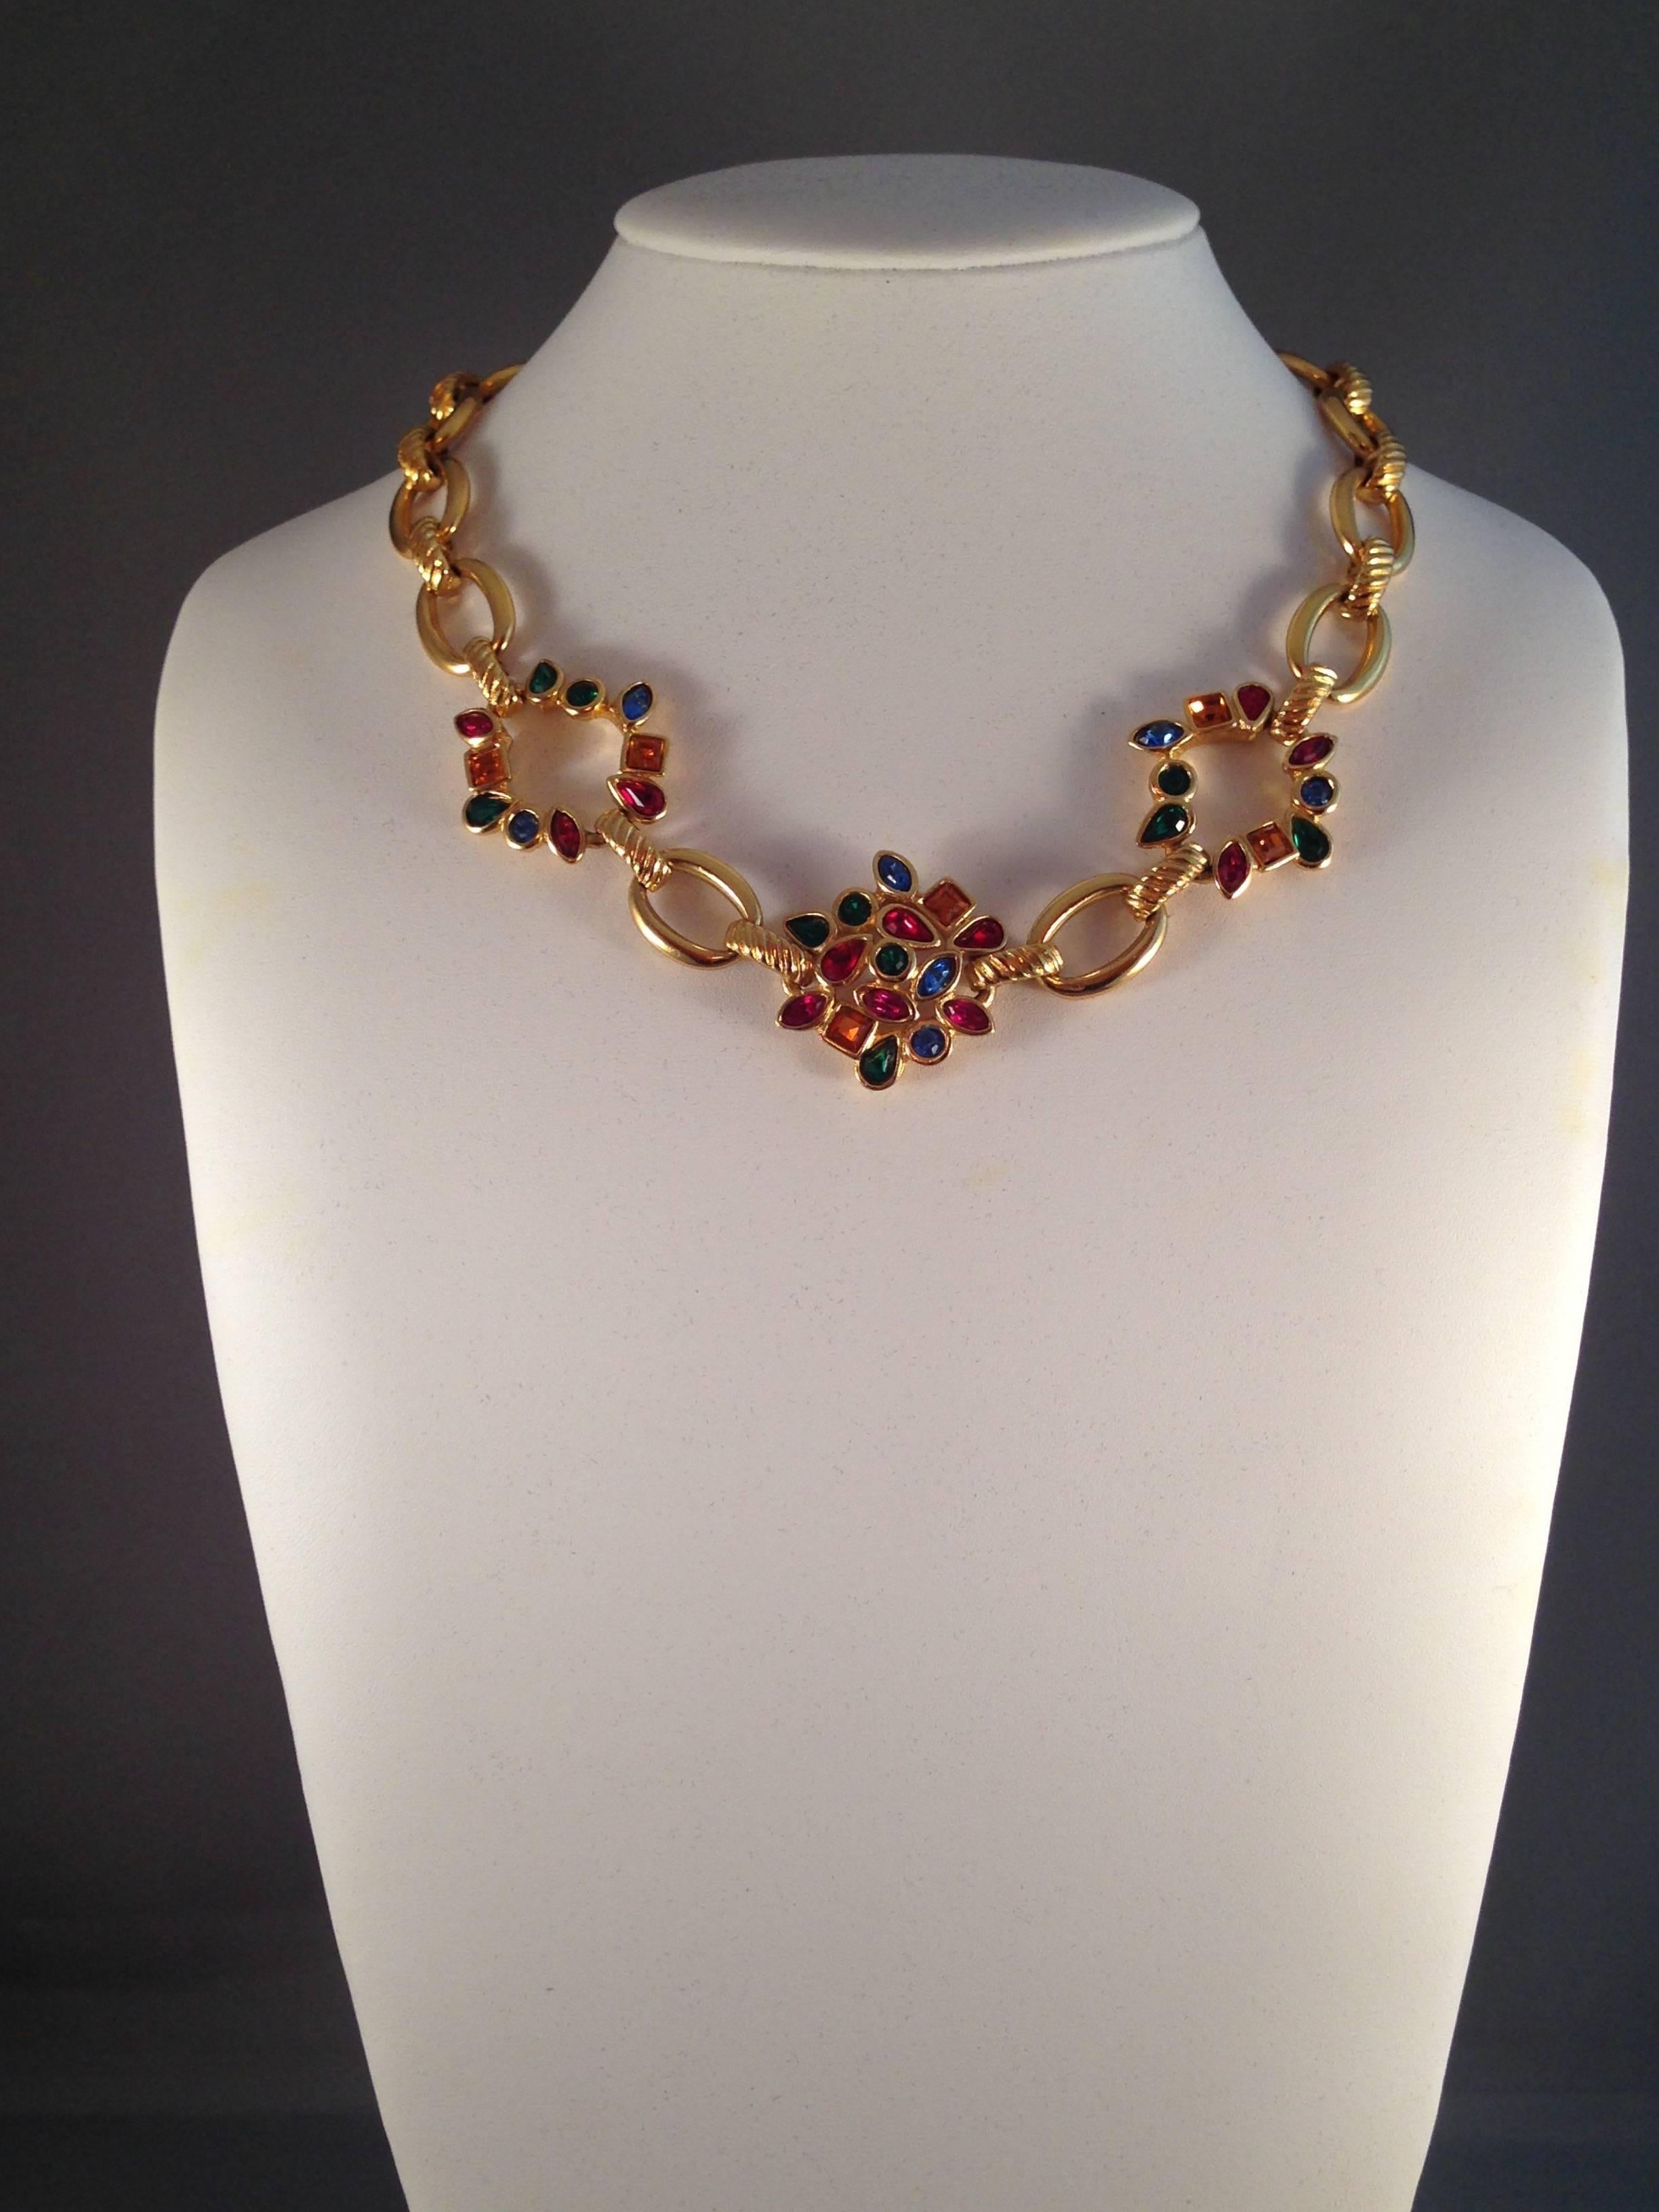 Vintage Yves Saint Laurent YSL Necklace with Multi-Colored Stones 1980s In Excellent Condition For Sale In Chicago, IL